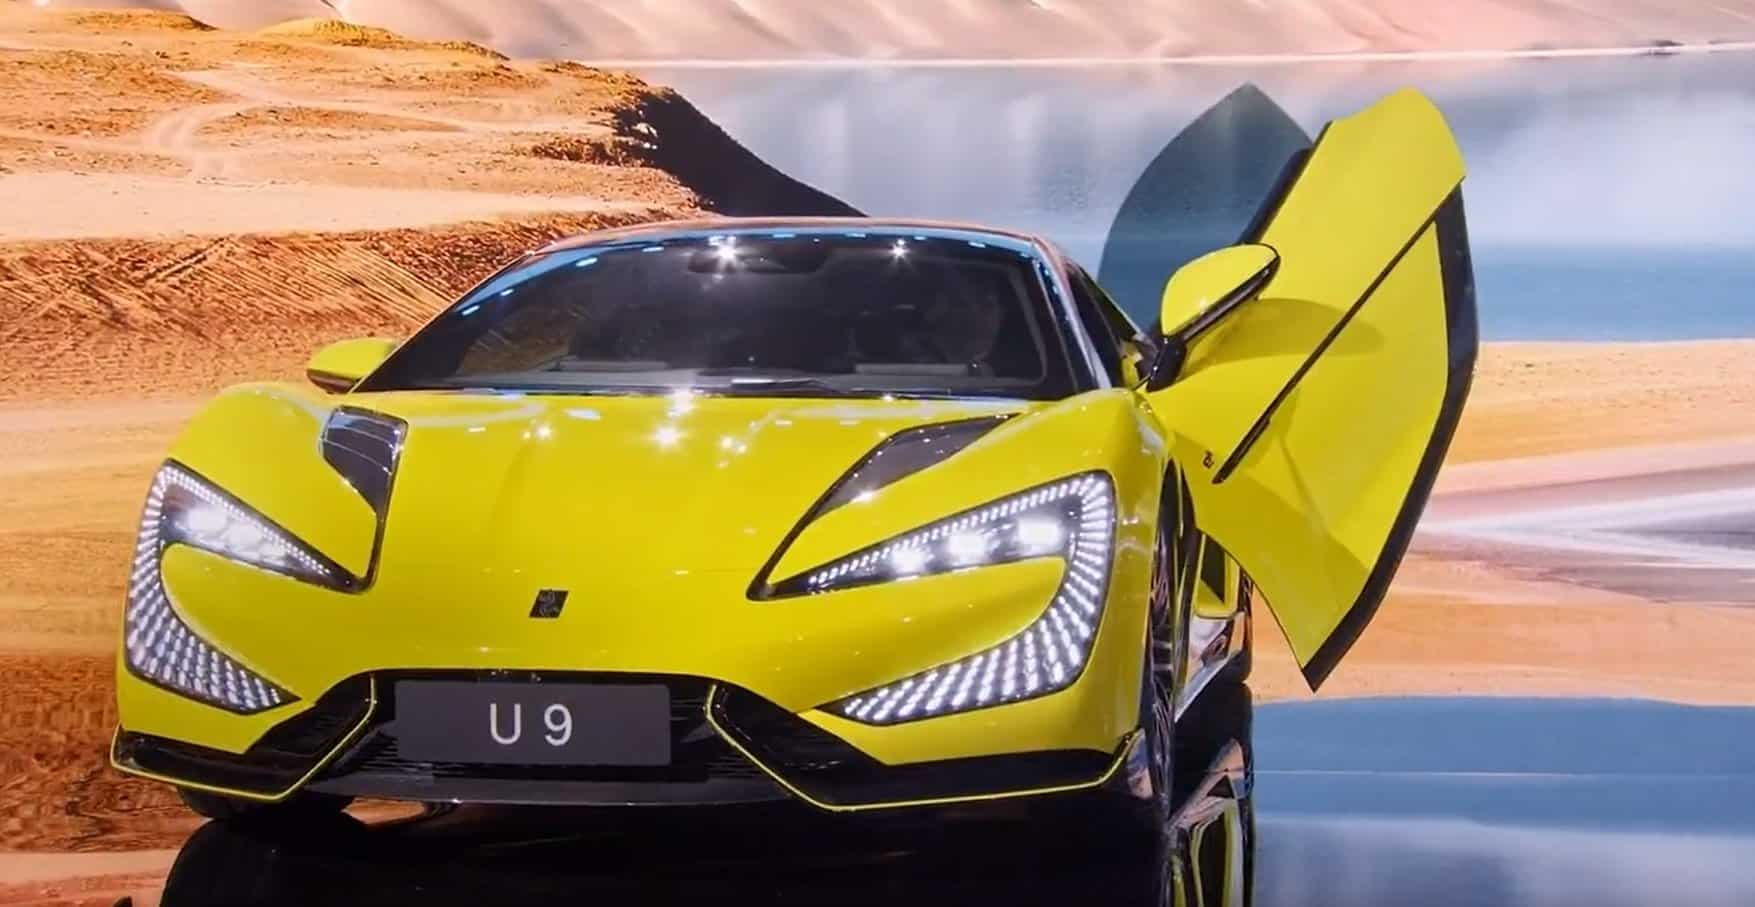 BYD Launches High-Performance Yangwang U9 Electric Supercar with Exceptional Speed and Advanced Technologies